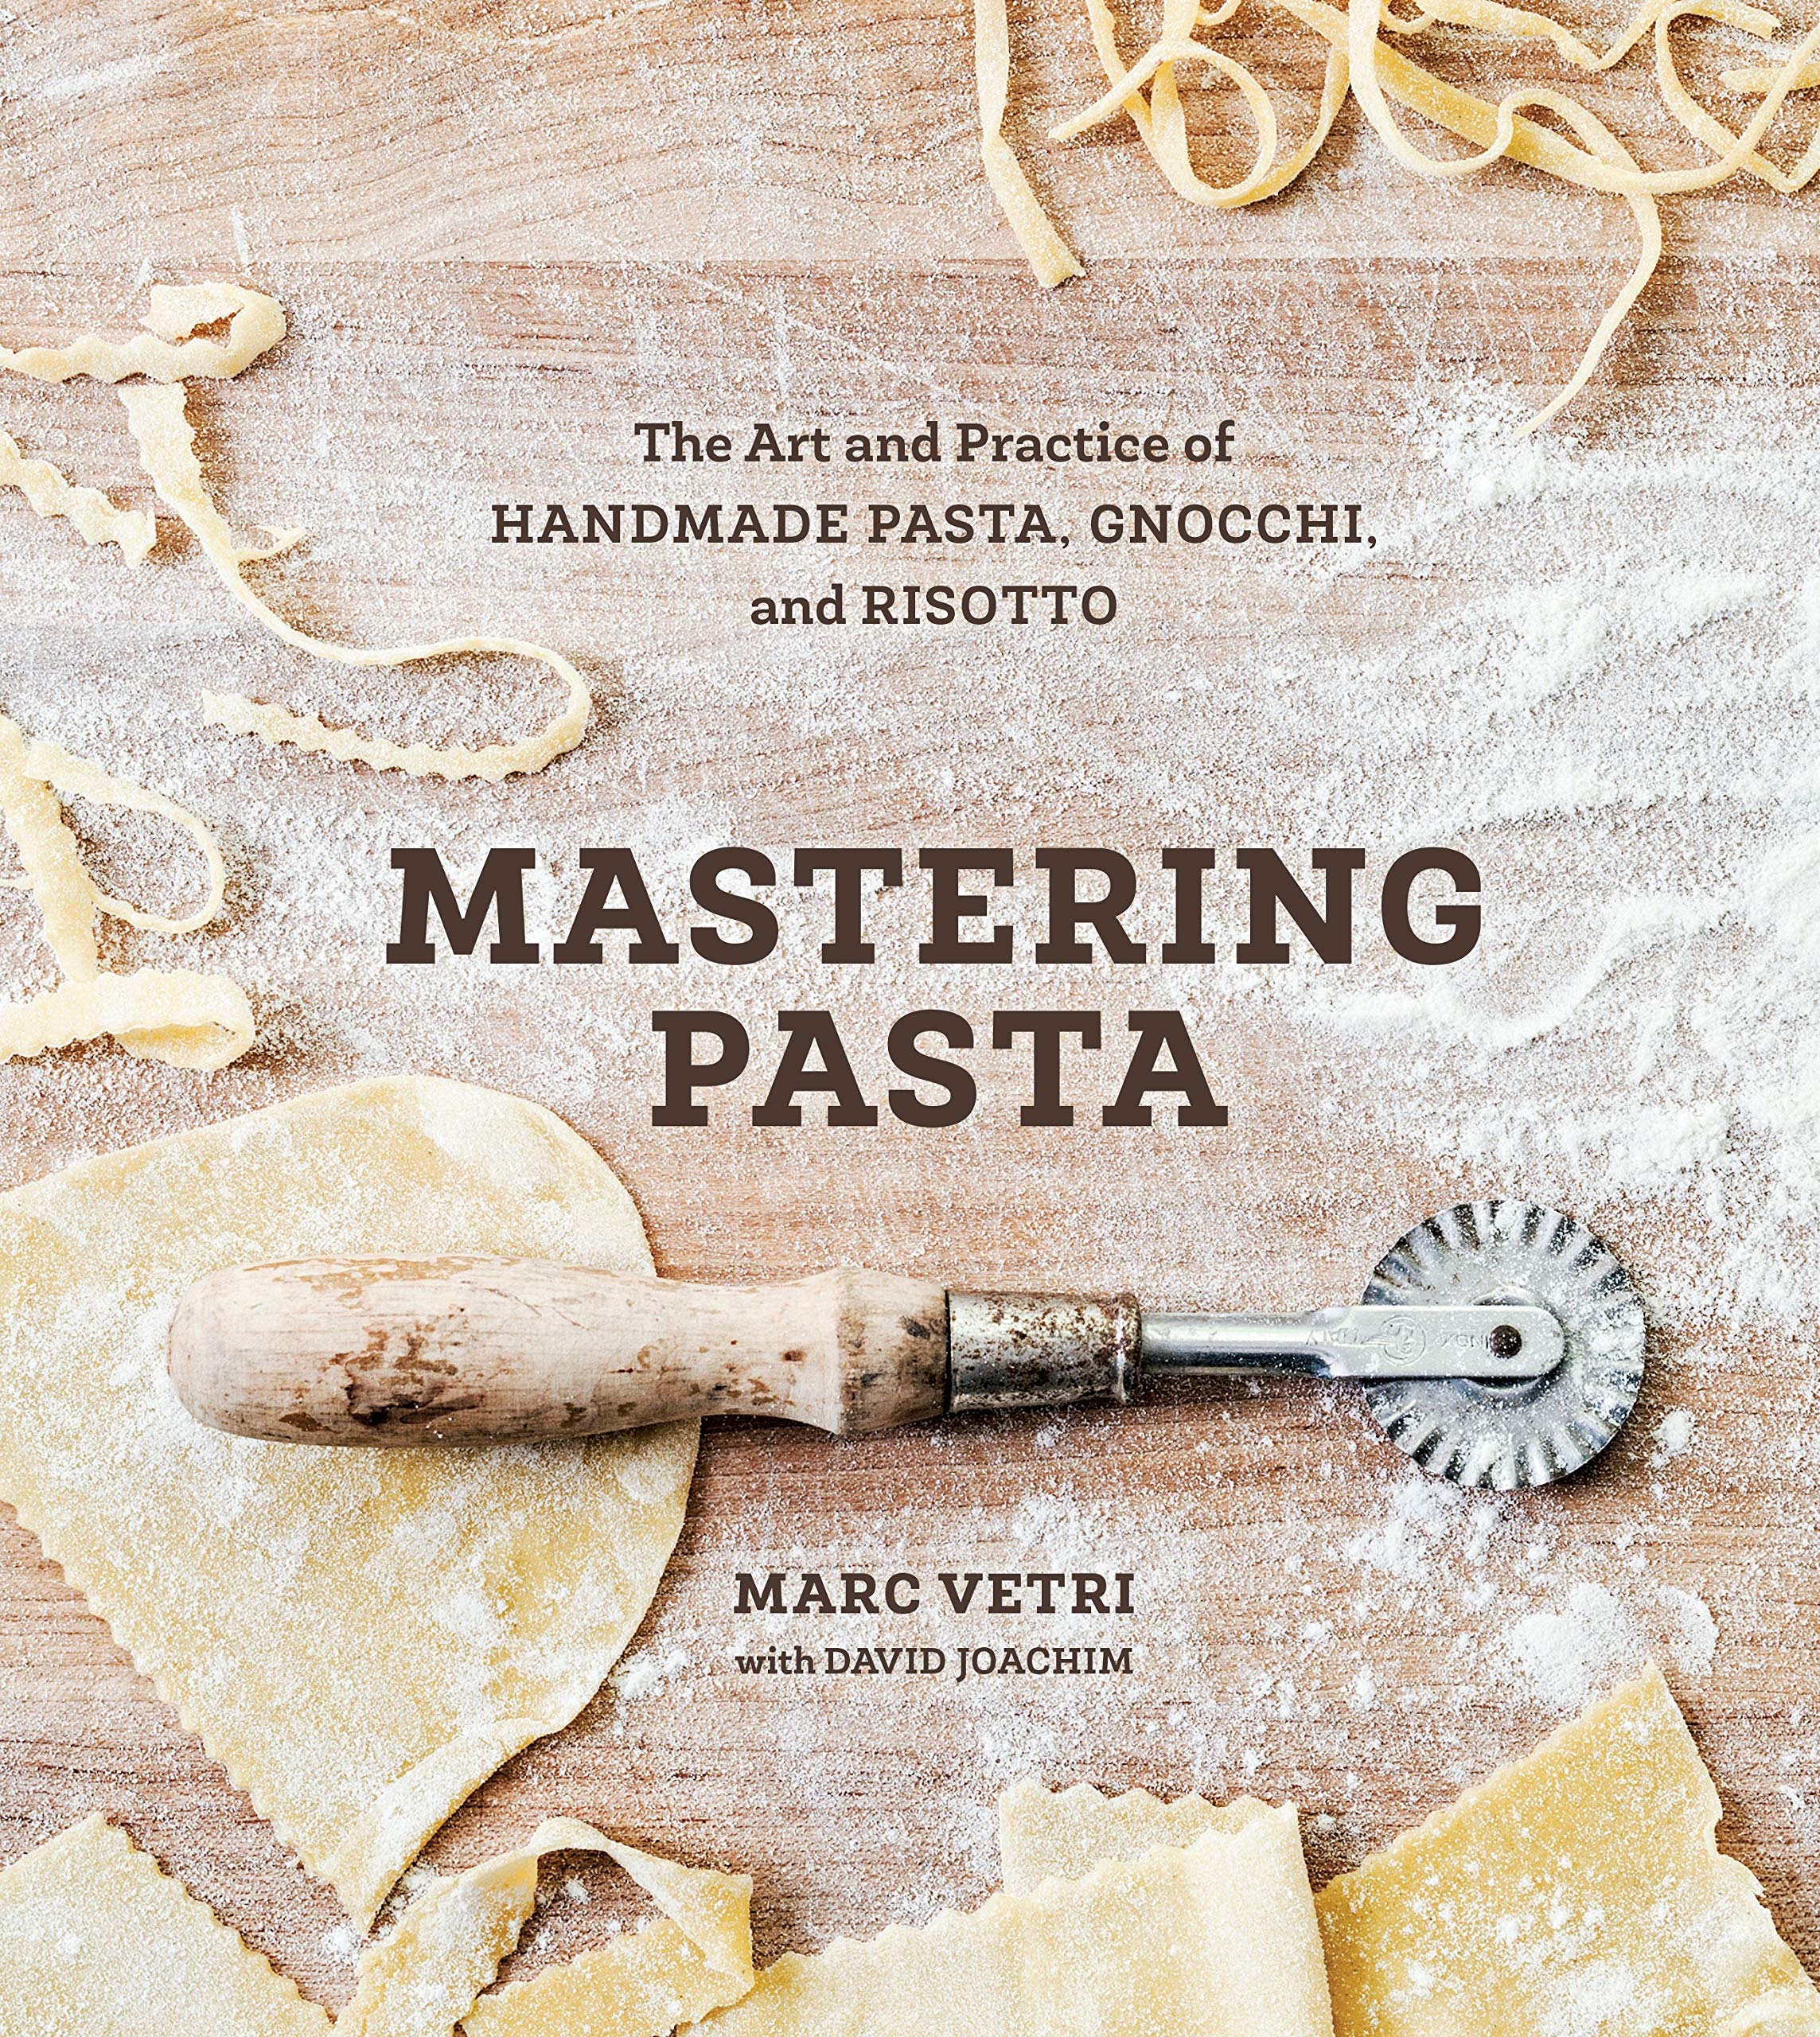 Mastering Pasta: The Art and Practice of Handmade Pasta, Gnocchi, and Risotto (Marc Vetri)